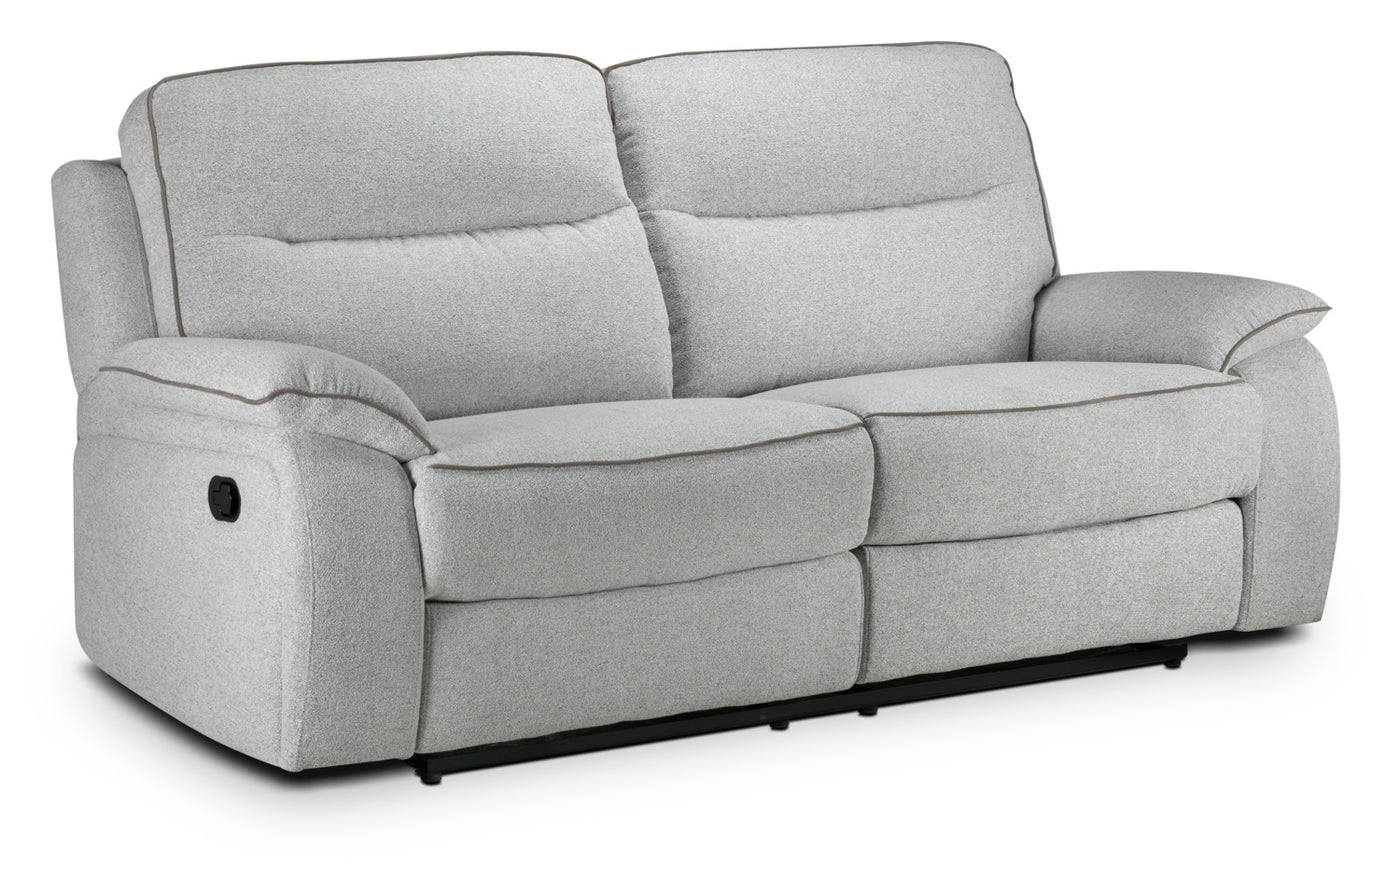 reclining sofa bed philippines